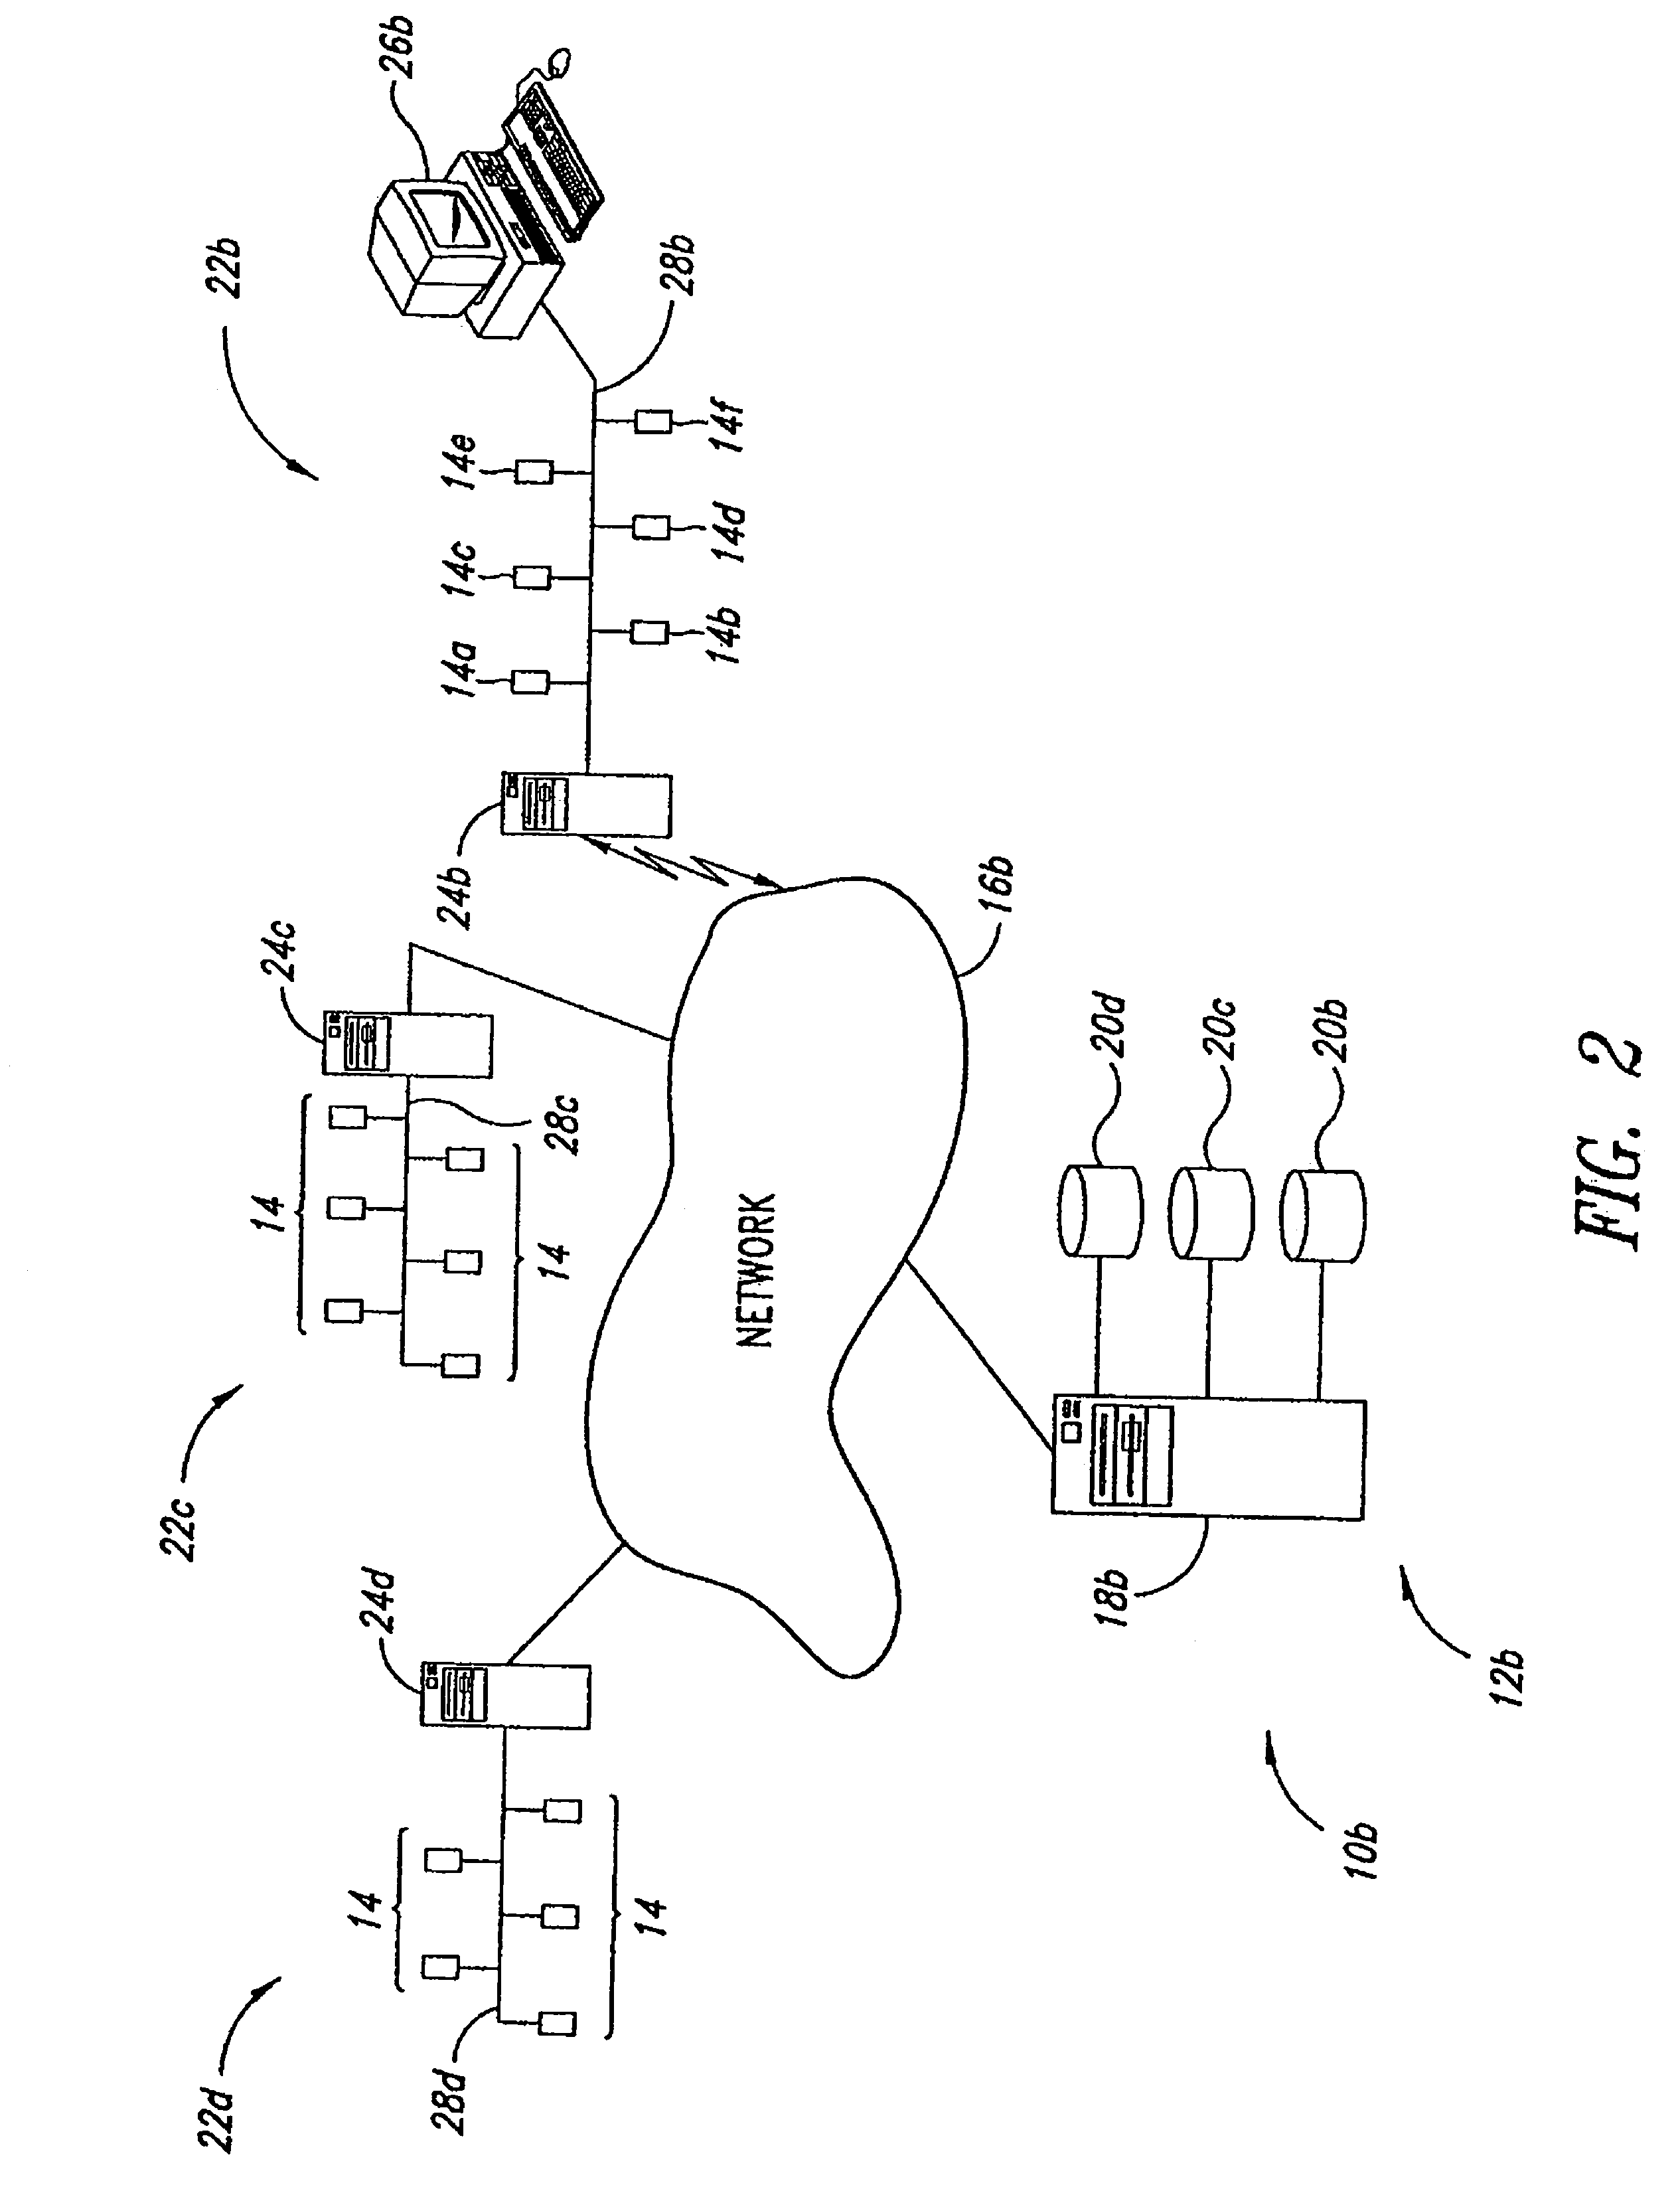 Method, apparatus, and article to facilitate distributed evaluation of objects using electromagnetic energy